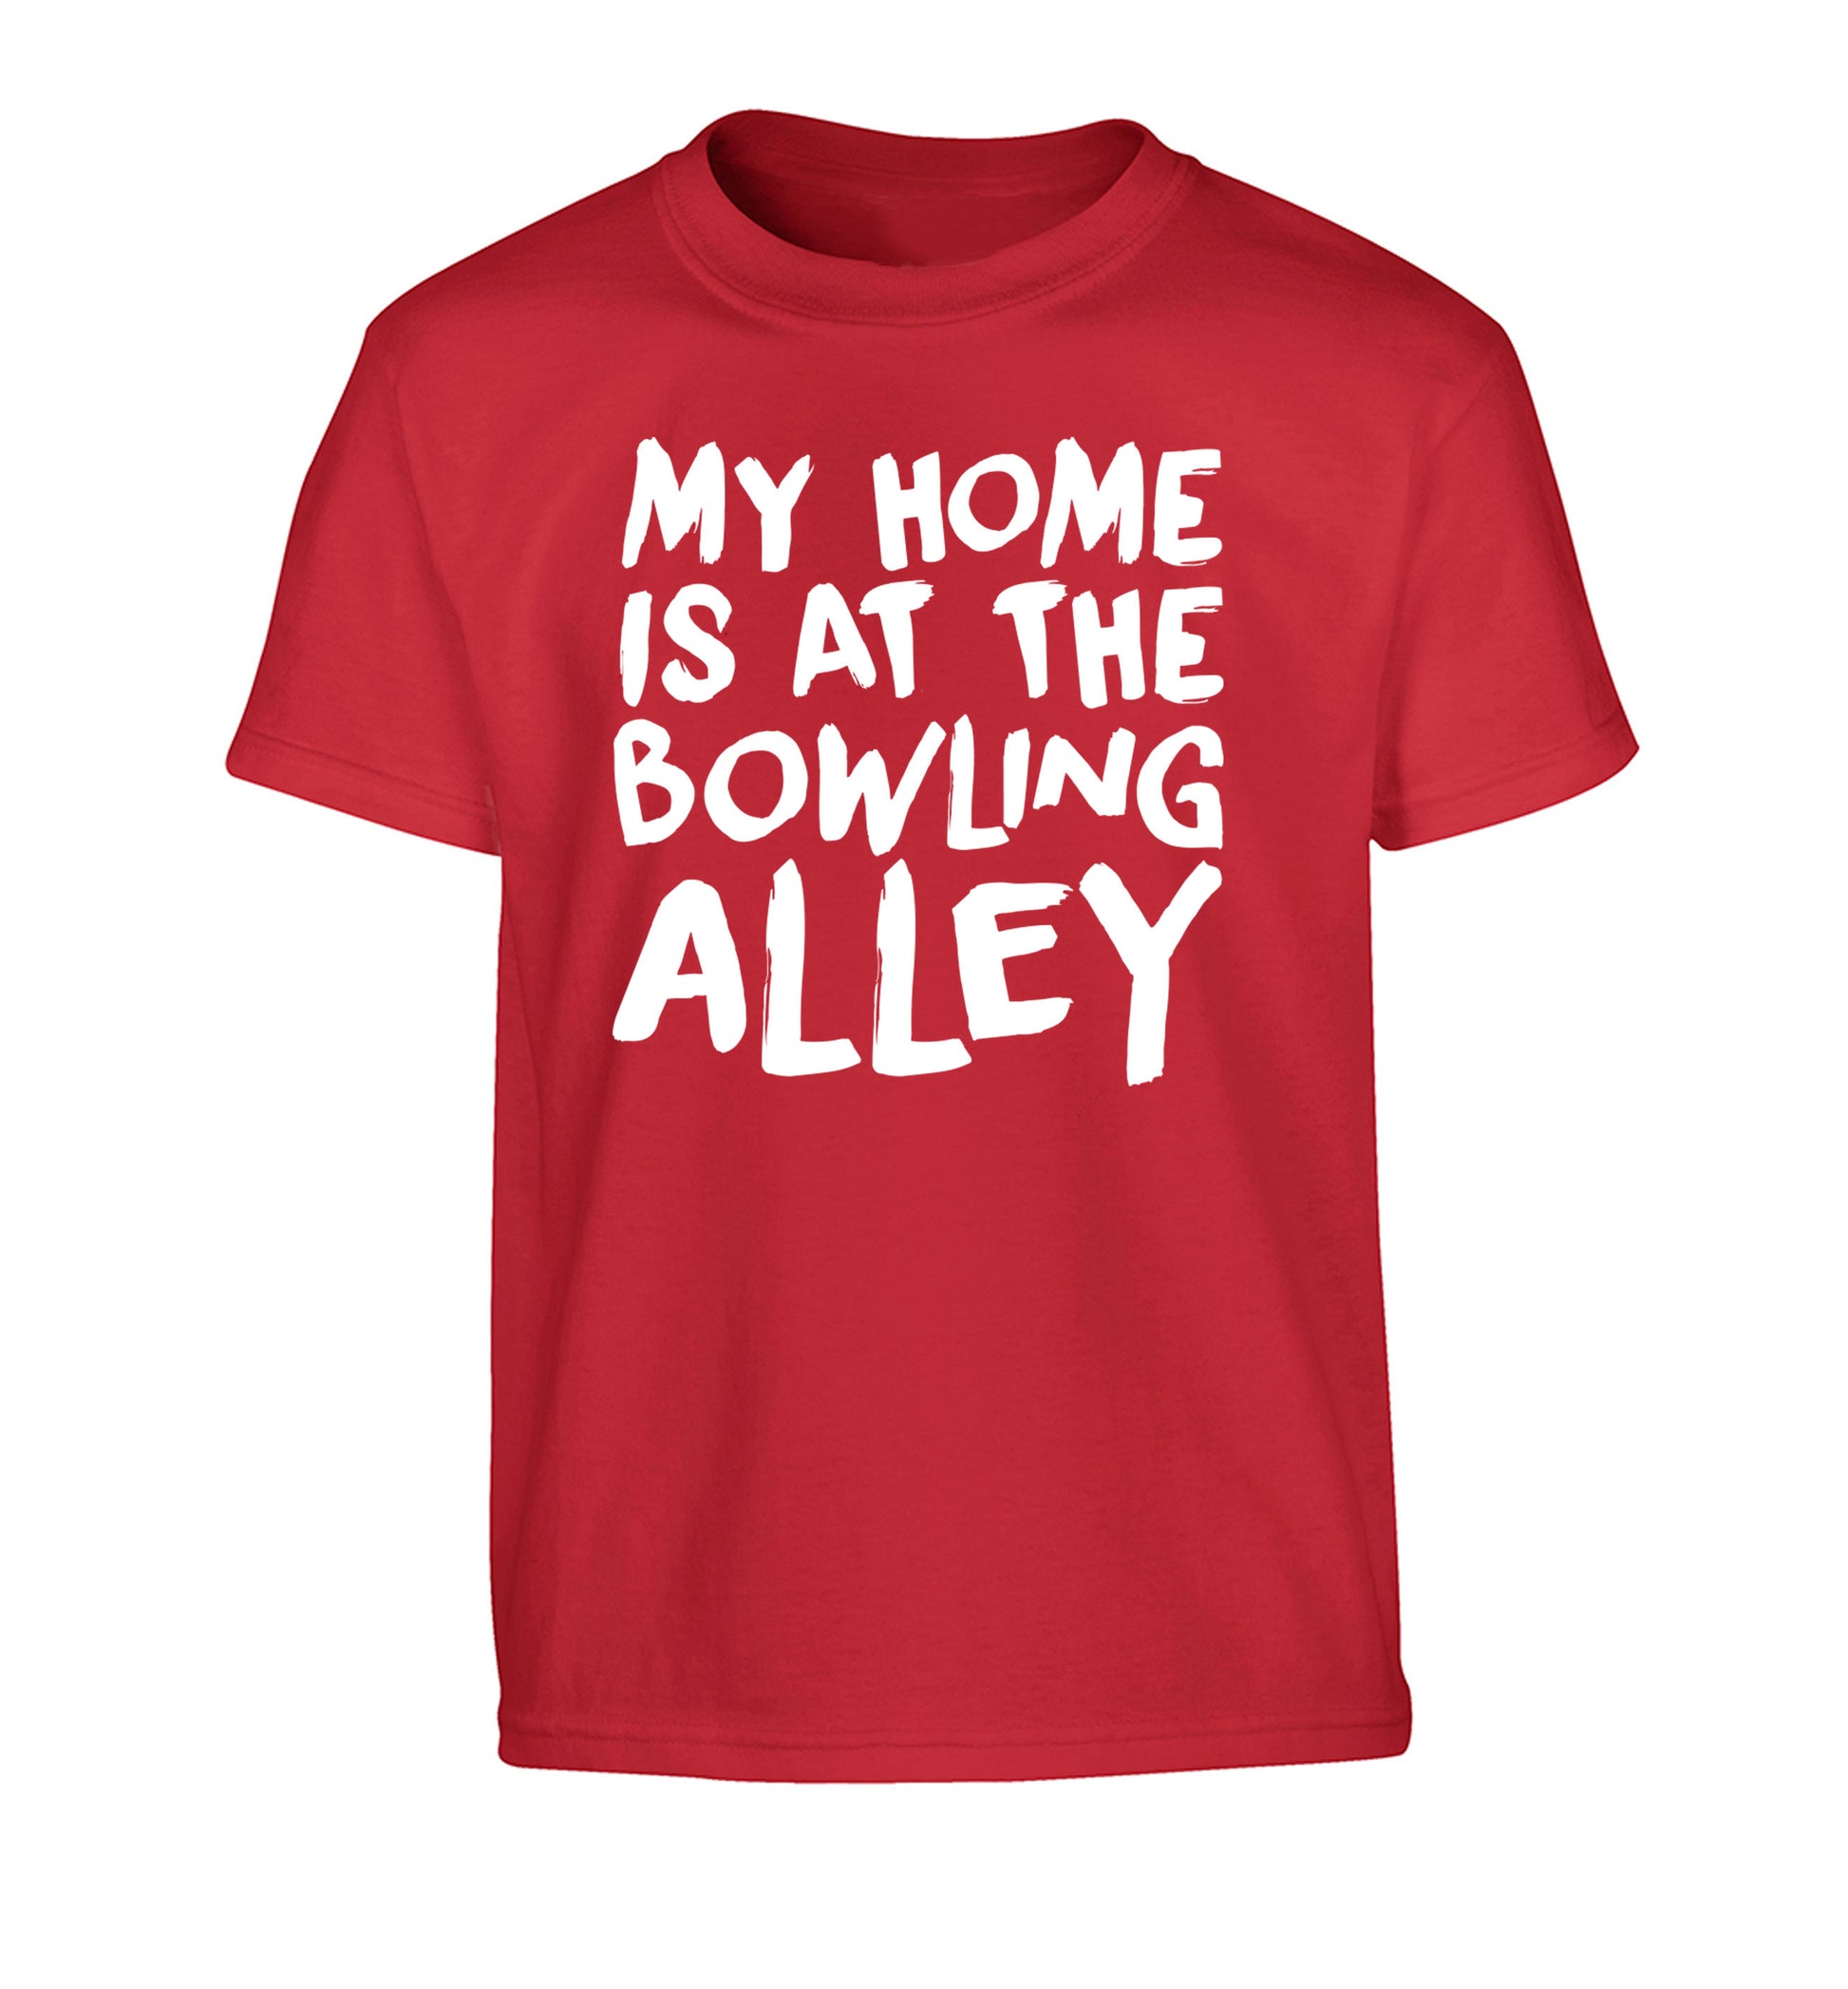 My home is at the bowling alley Children's red Tshirt 12-14 Years